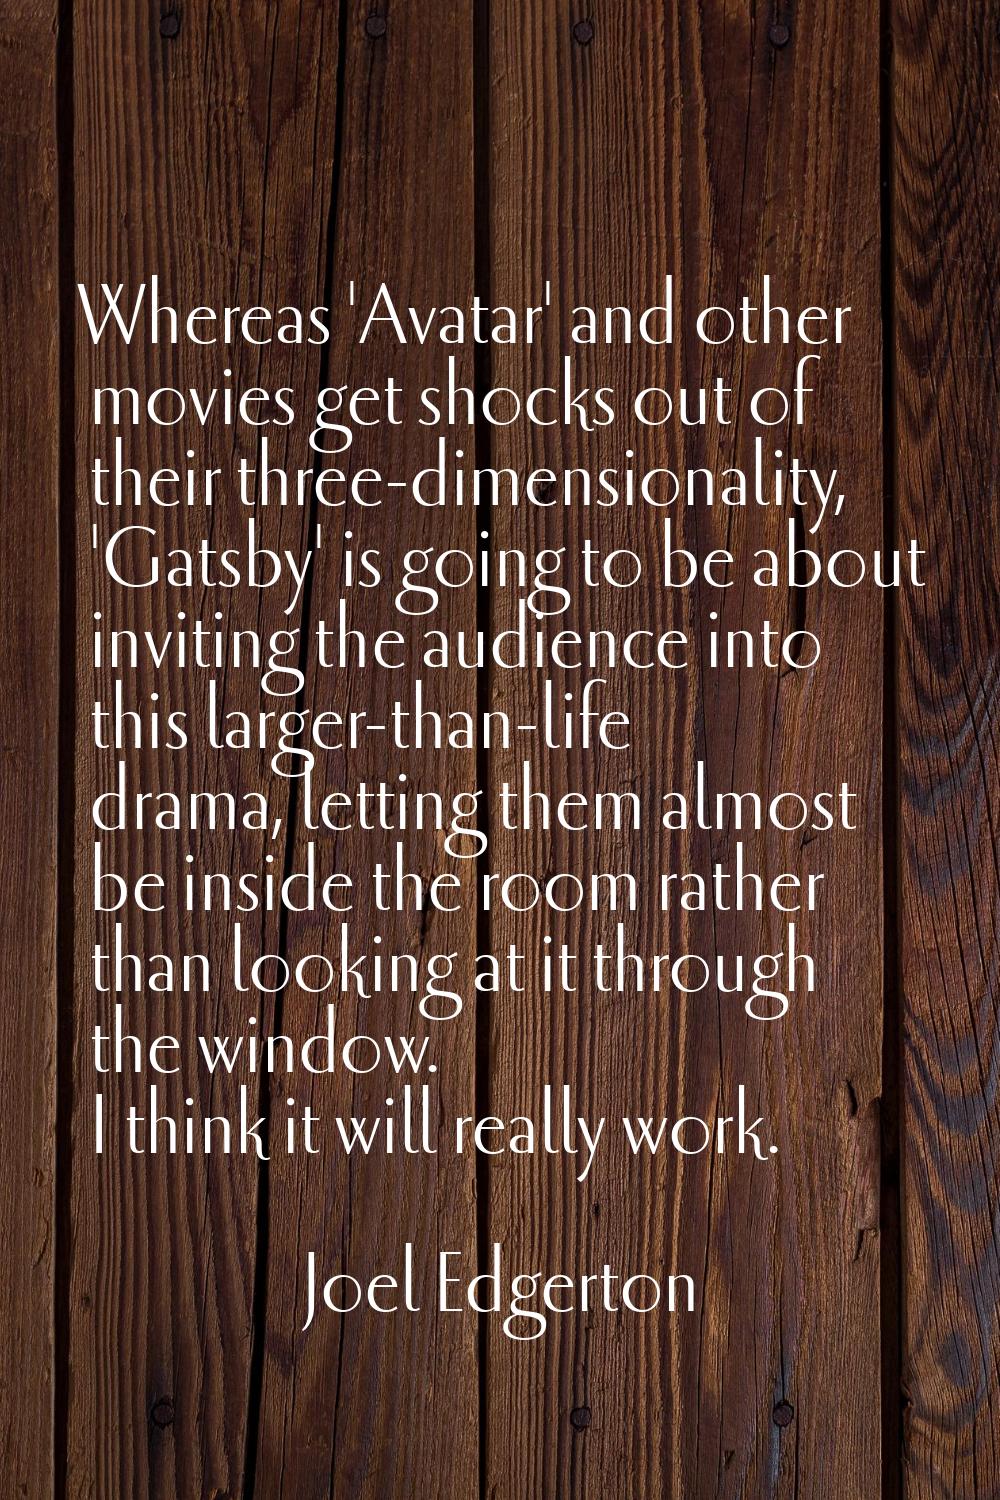 Whereas 'Avatar' and other movies get shocks out of their three-dimensionality, 'Gatsby' is going t